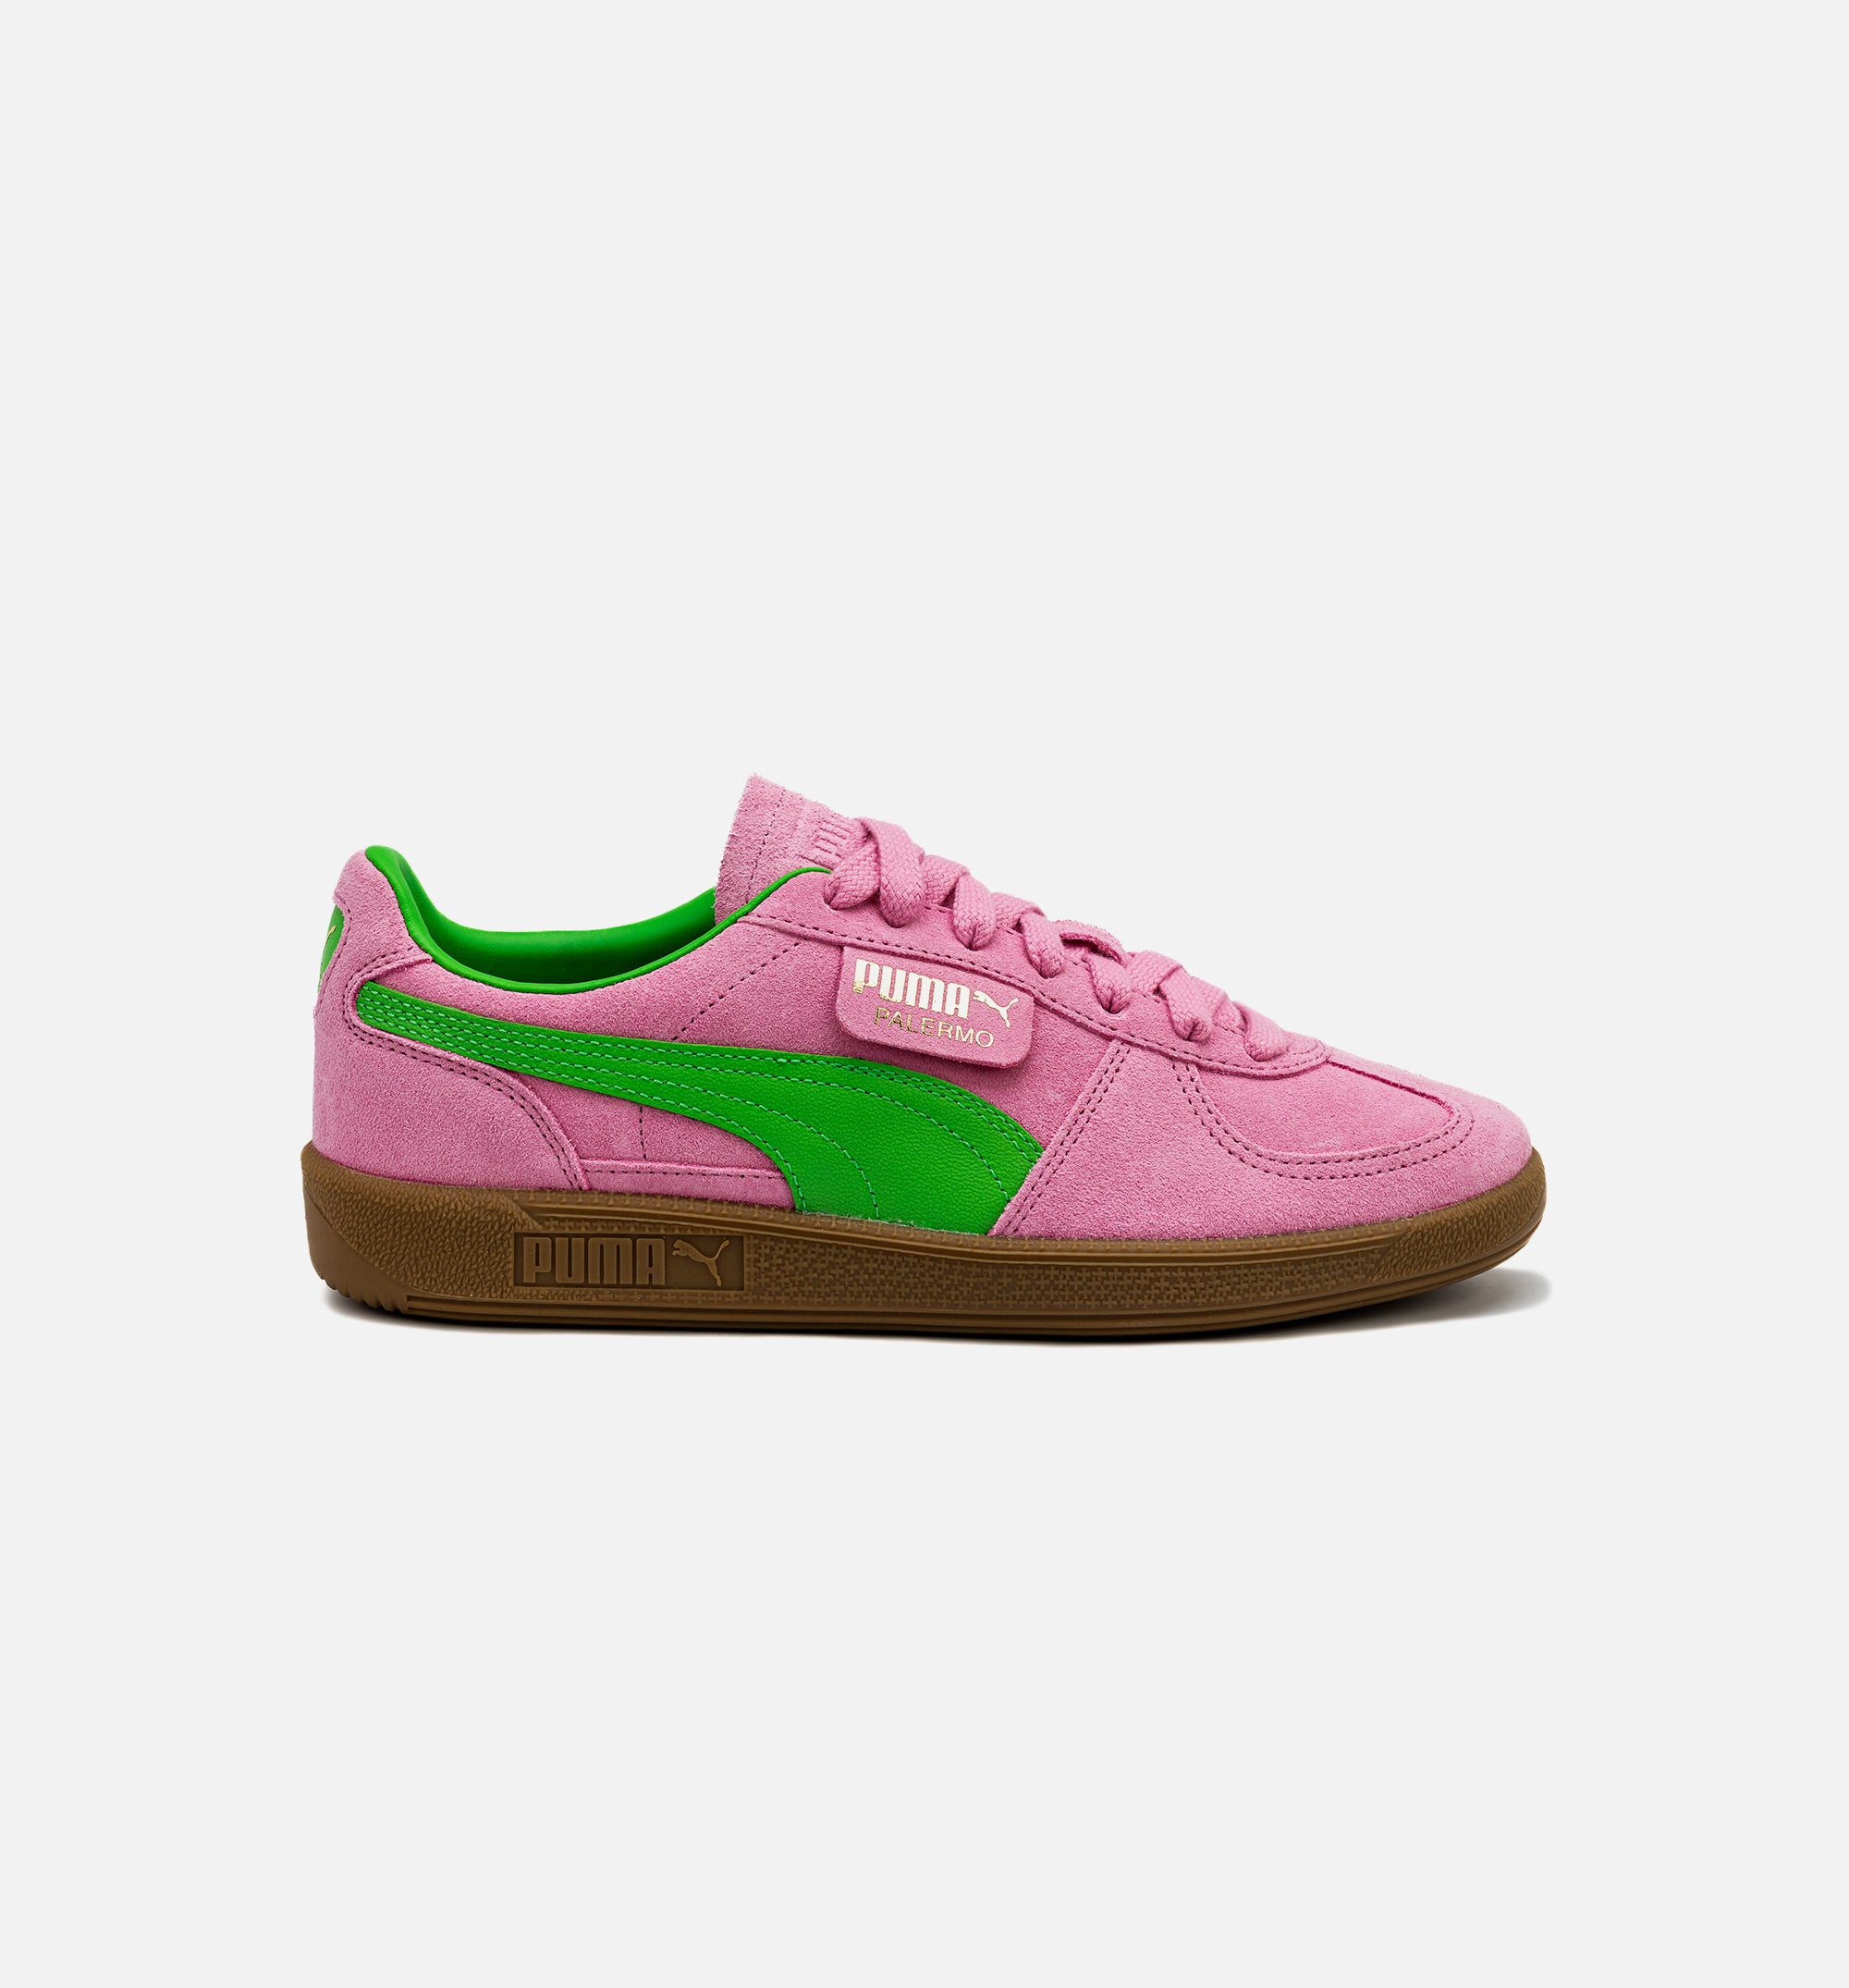 PUMA 397858-01 Palermo Special Womens Lifestyle Shoe - Pink/Green ...